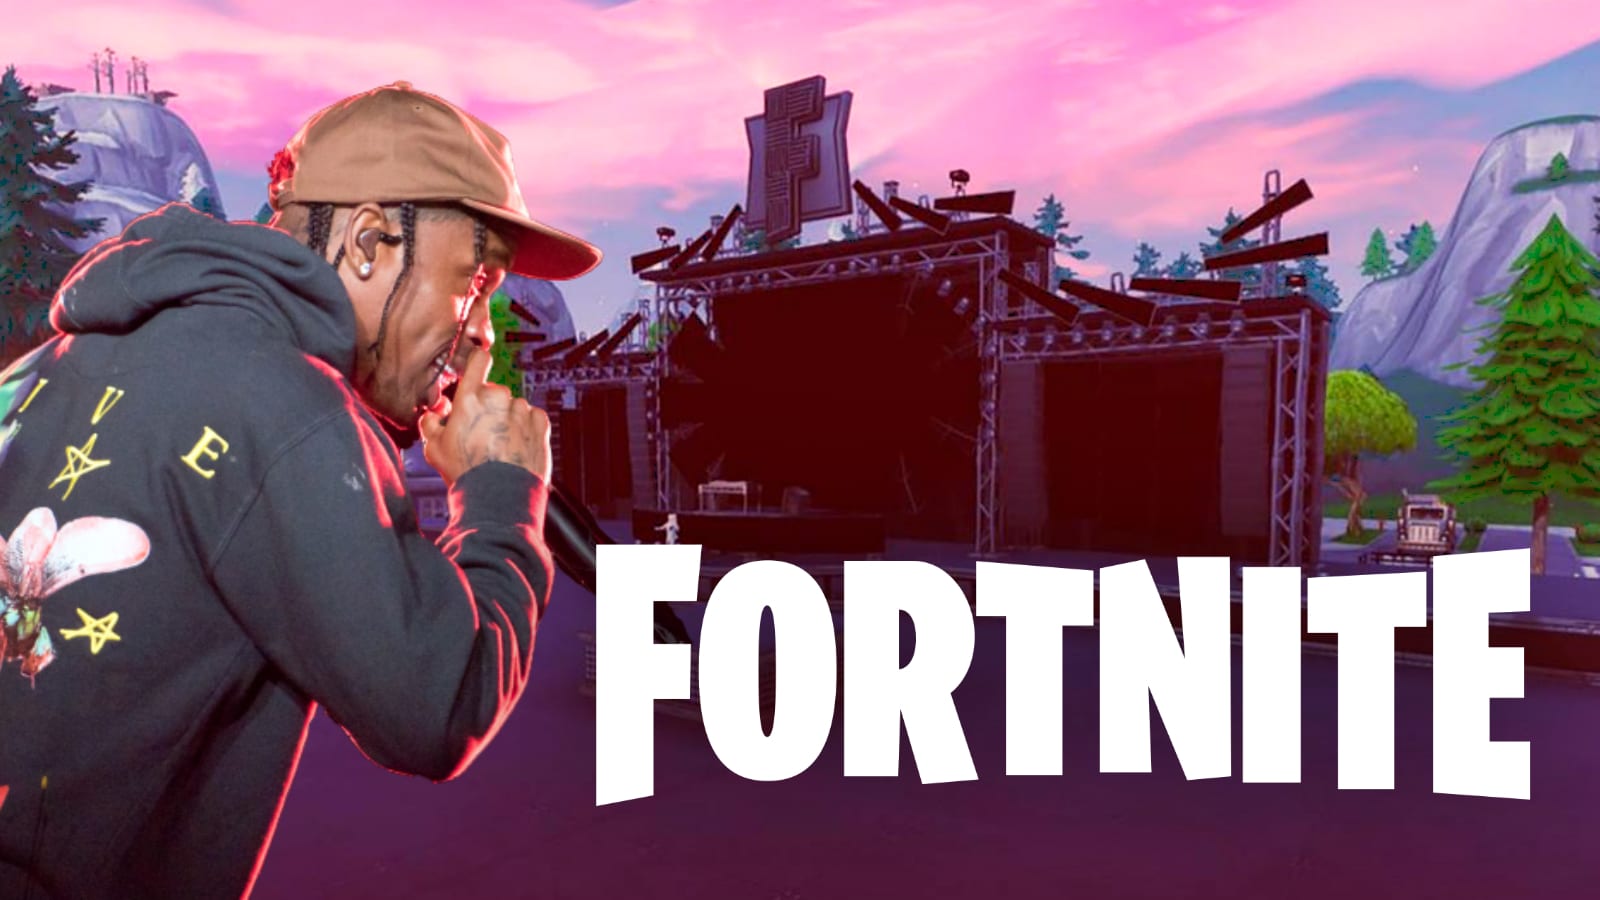 Travis Scott's Fortnite concert is already being built on the map